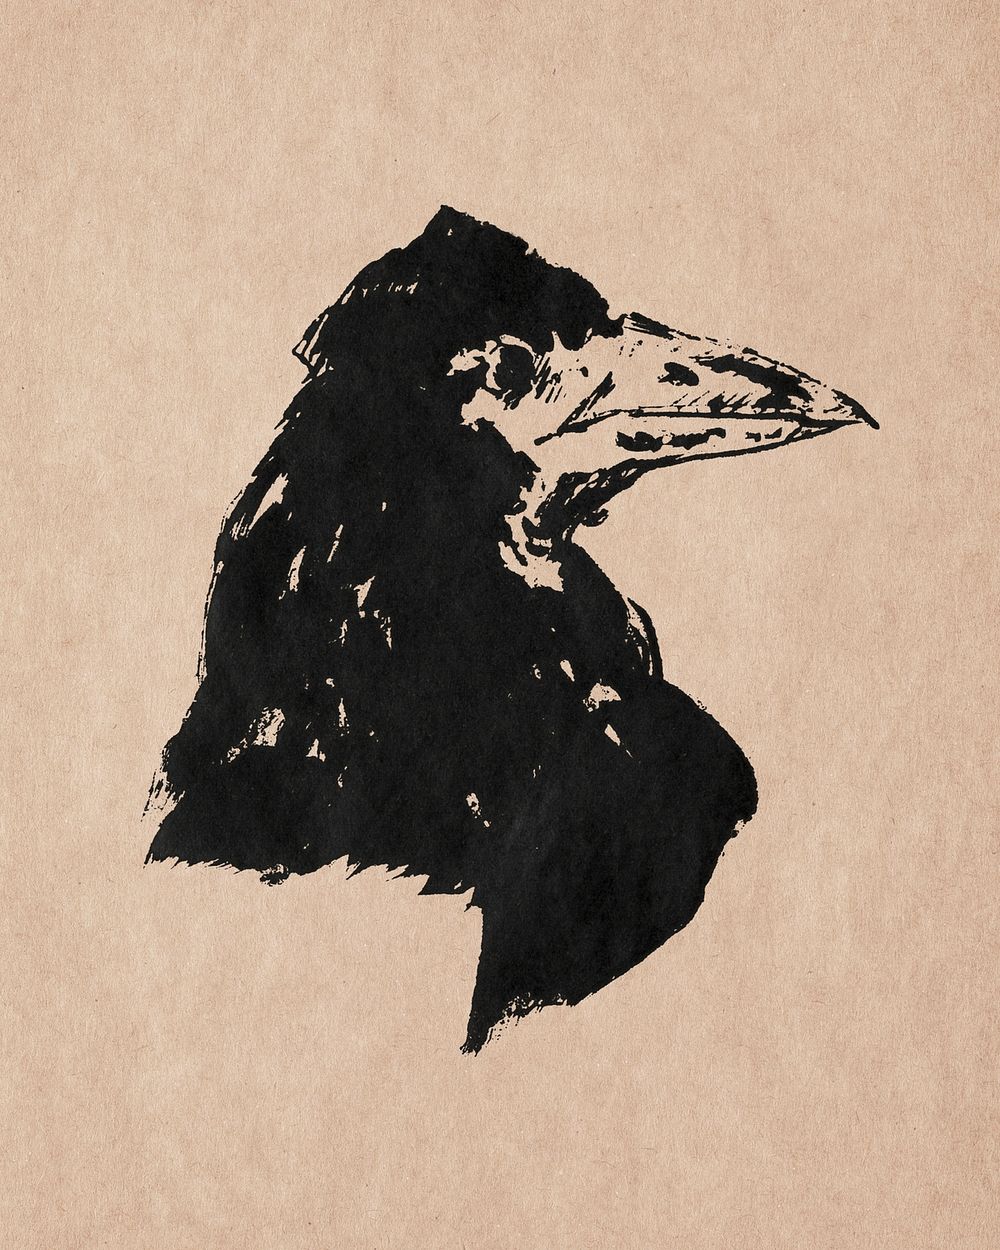 Black raven head psd vintage art print, remixed from artworks by &Eacute;douard Manet